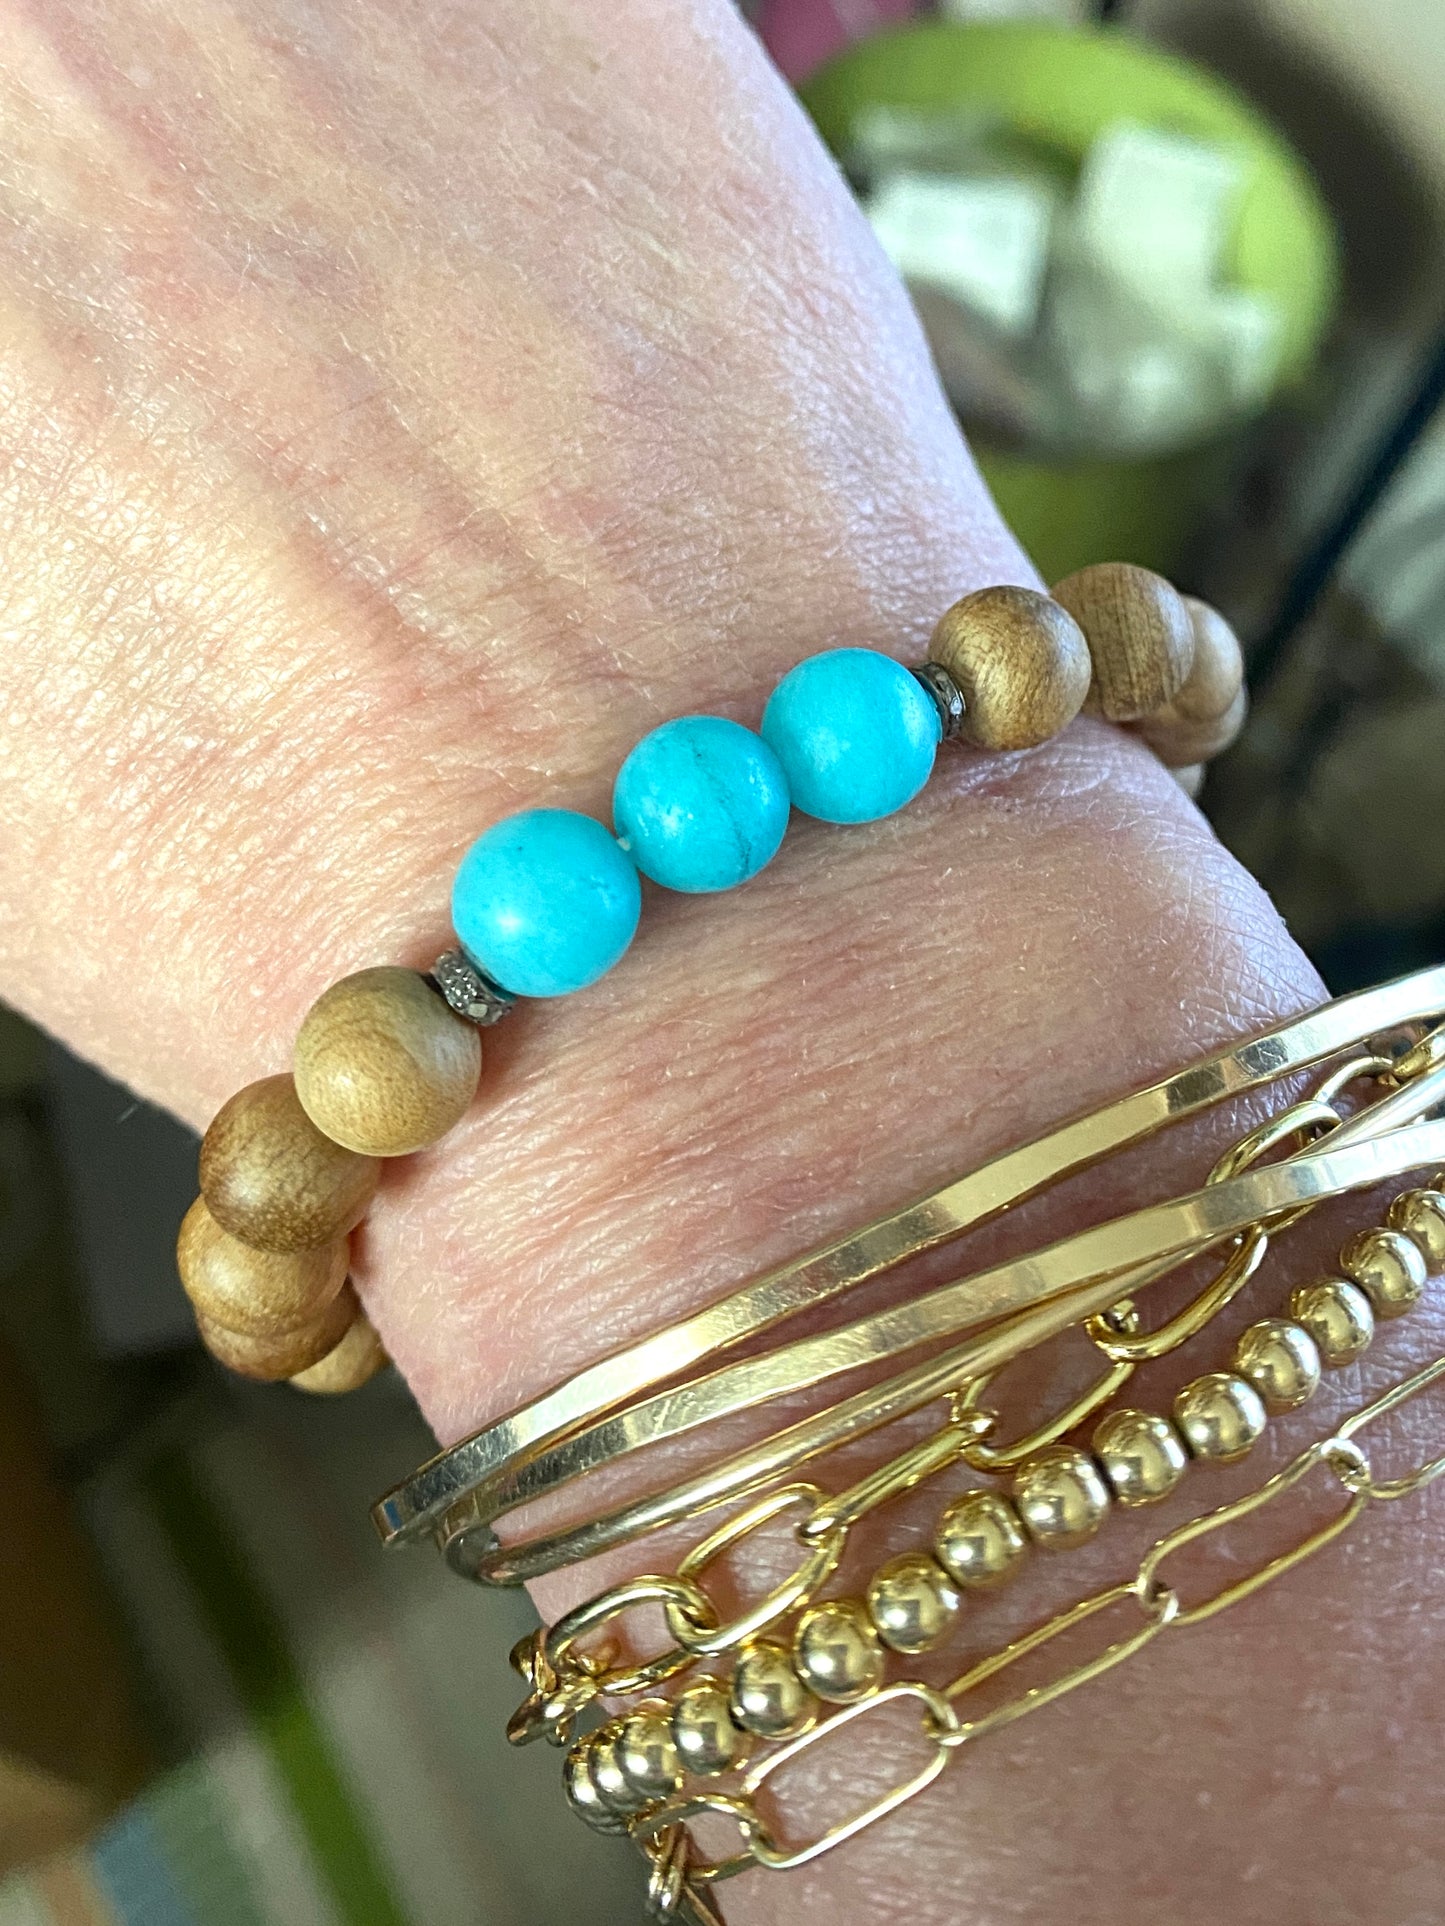 Brown Wooden Elastic Bracelet With Three Blue Jade Beads With Diamond Spacers